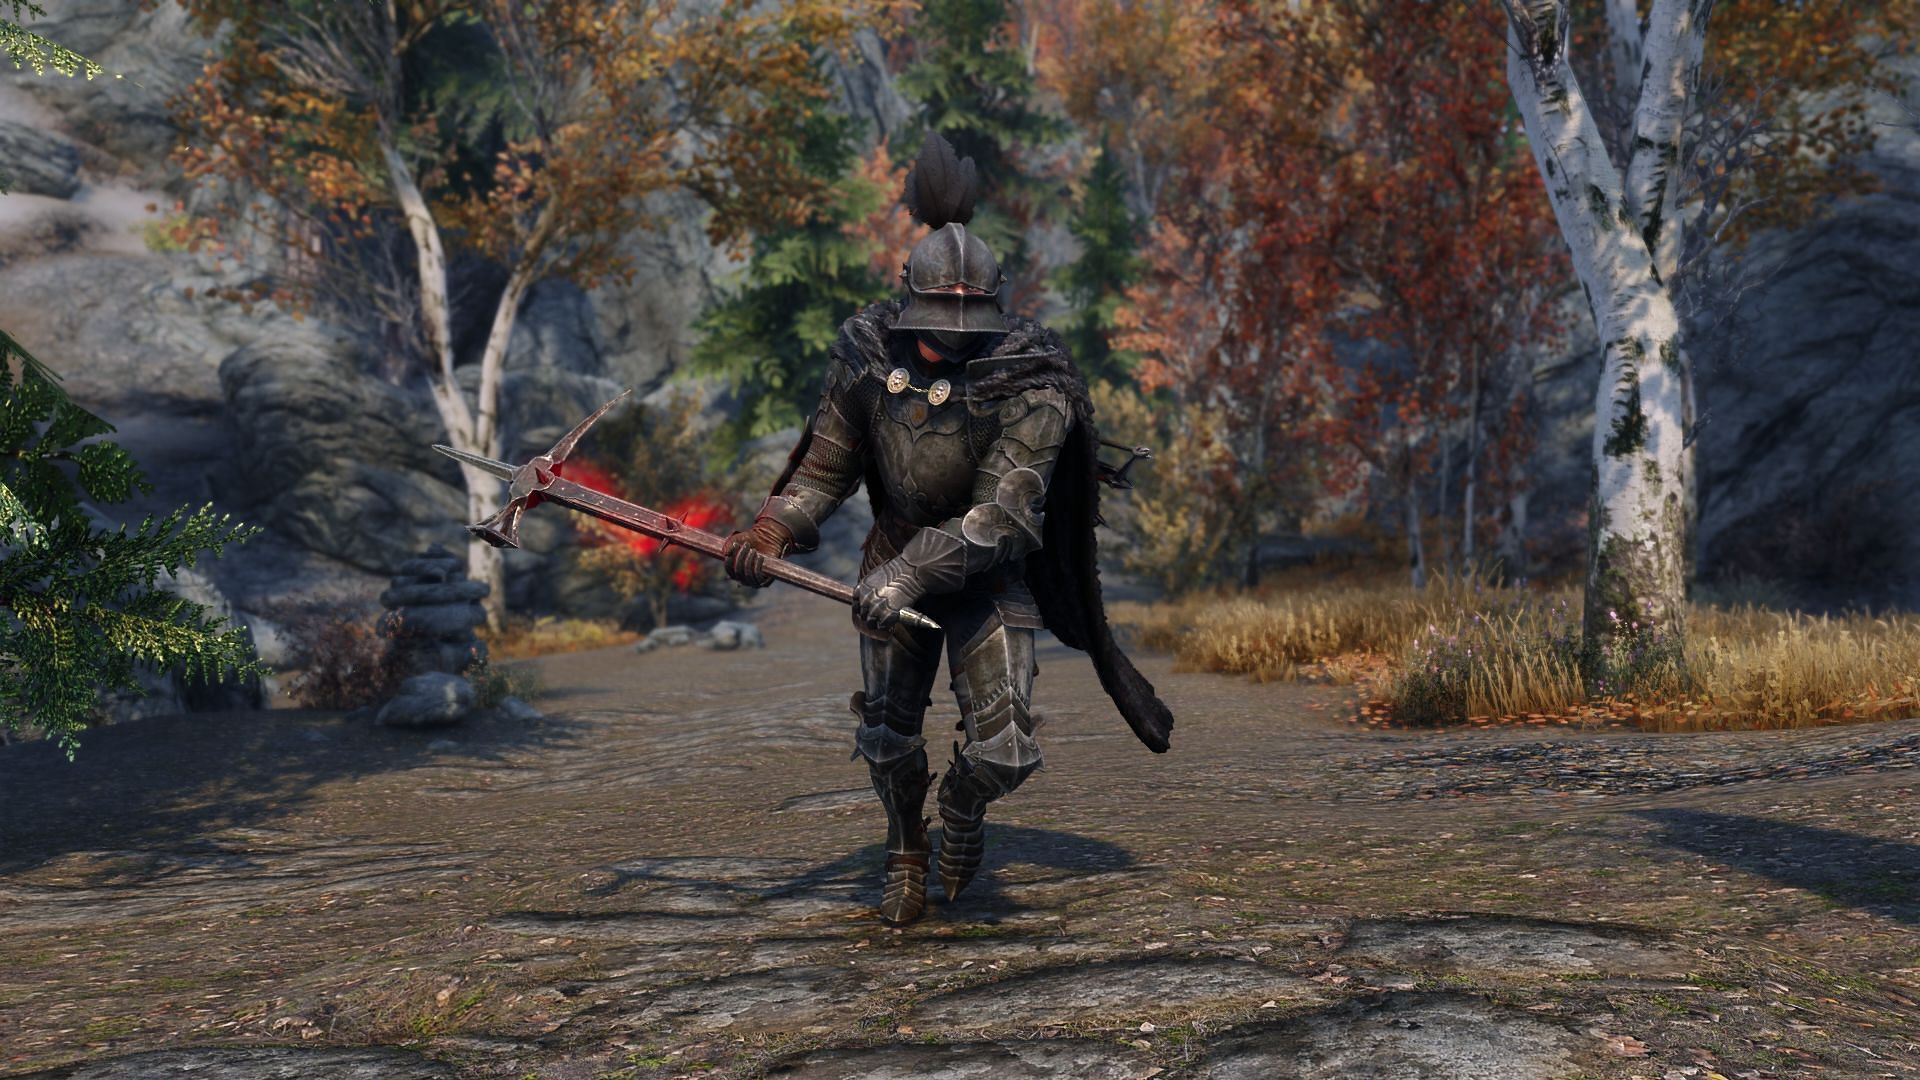 The Ebony Mail Reborn mod can be used to give this class even better fashion in Skyrim (Image via Nexusmods)